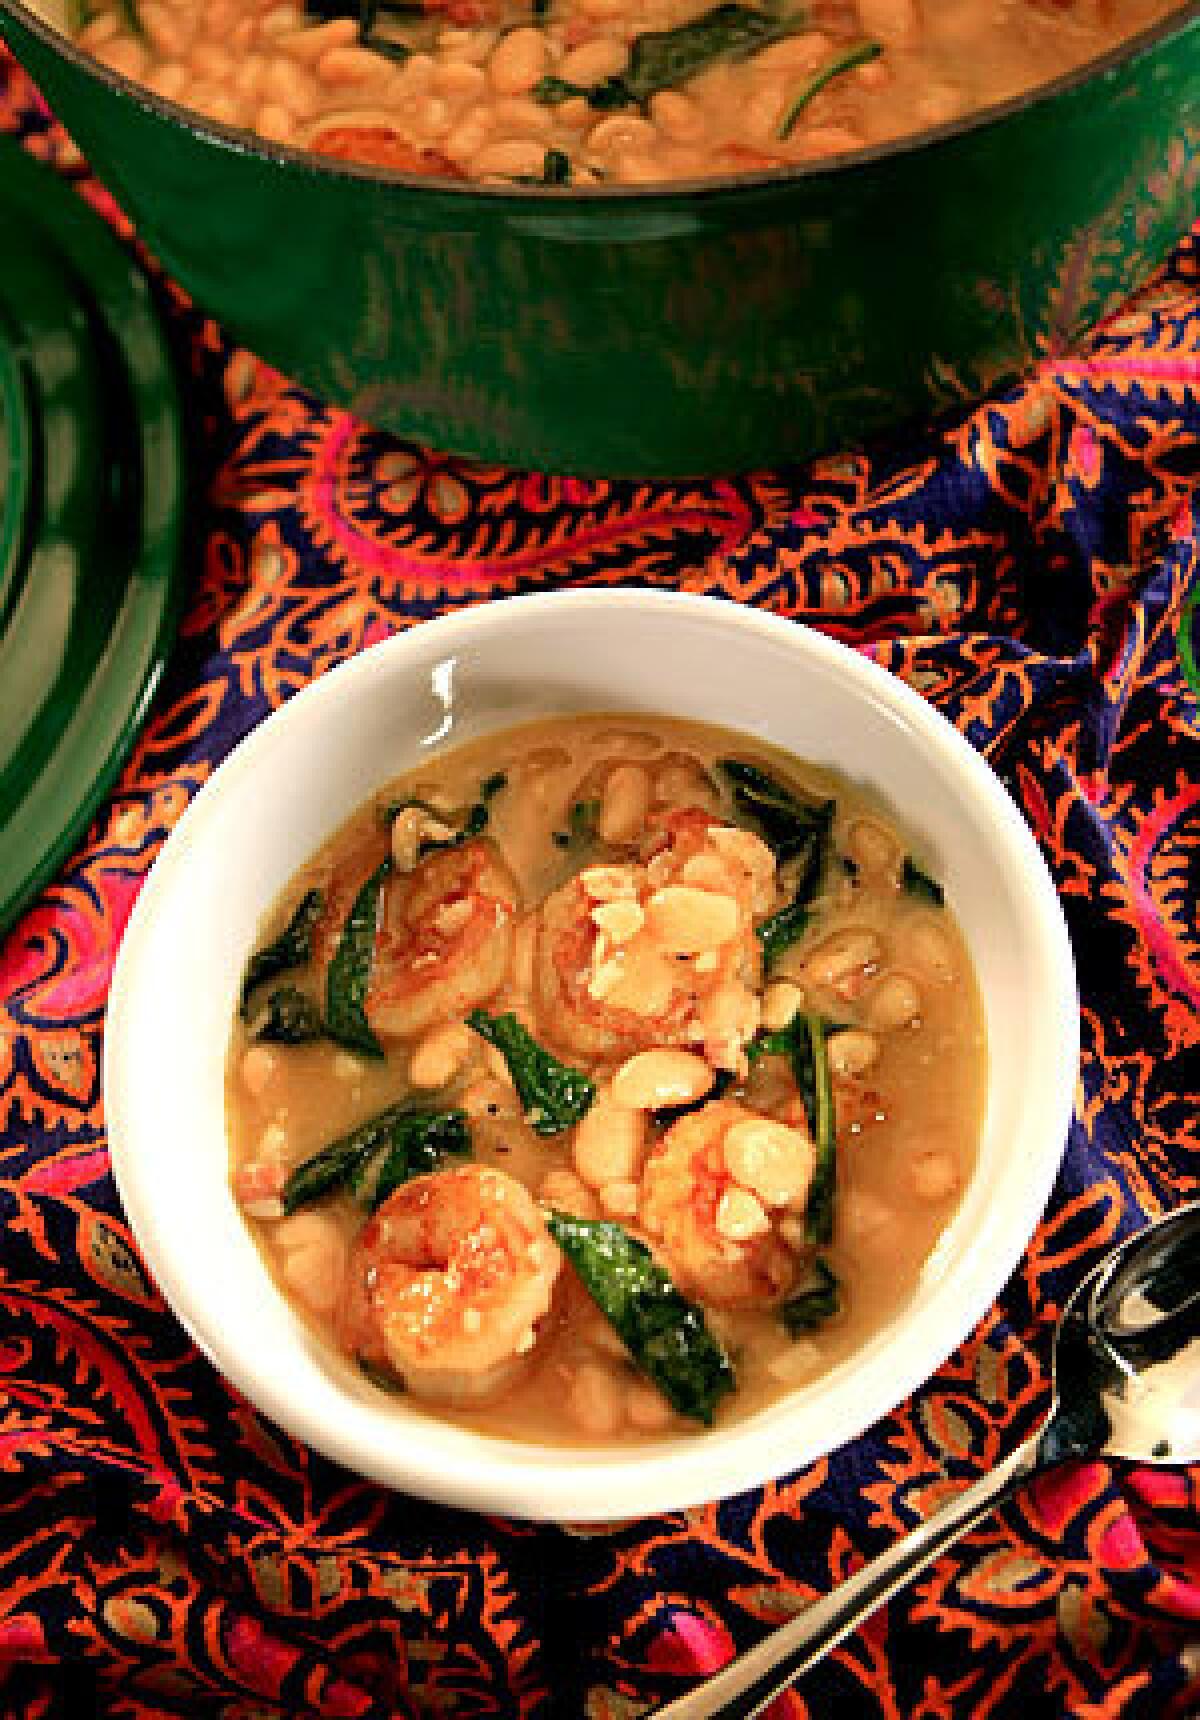 HEARTY: White bean and shrimp stew with dandelion greens.